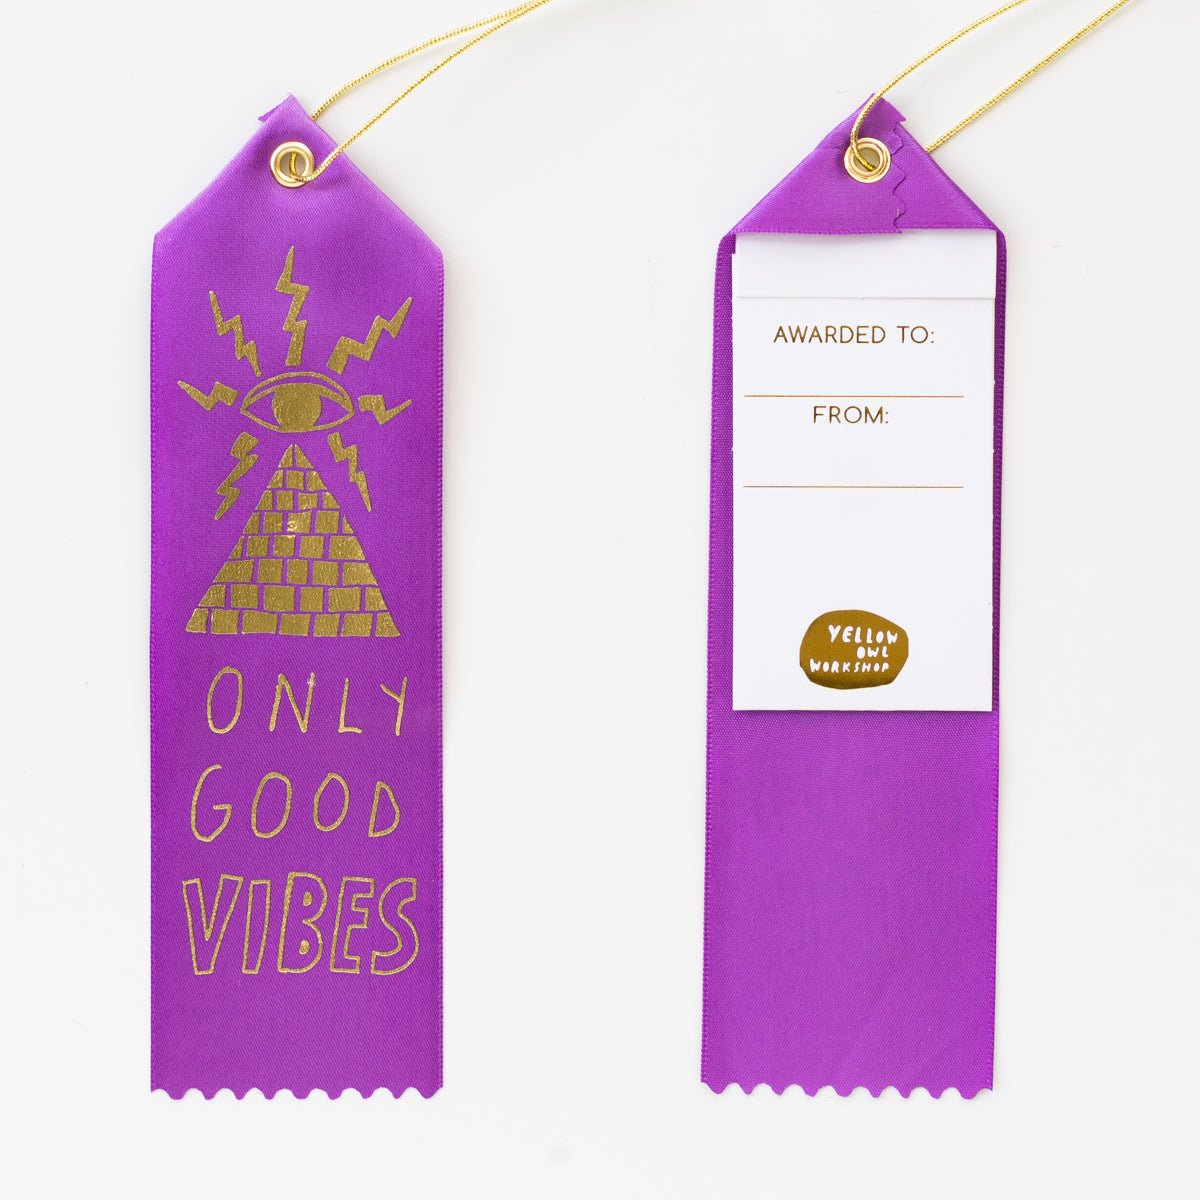 Only Good Vibes - Award Ribbon Card - Yellow Owl Workshop